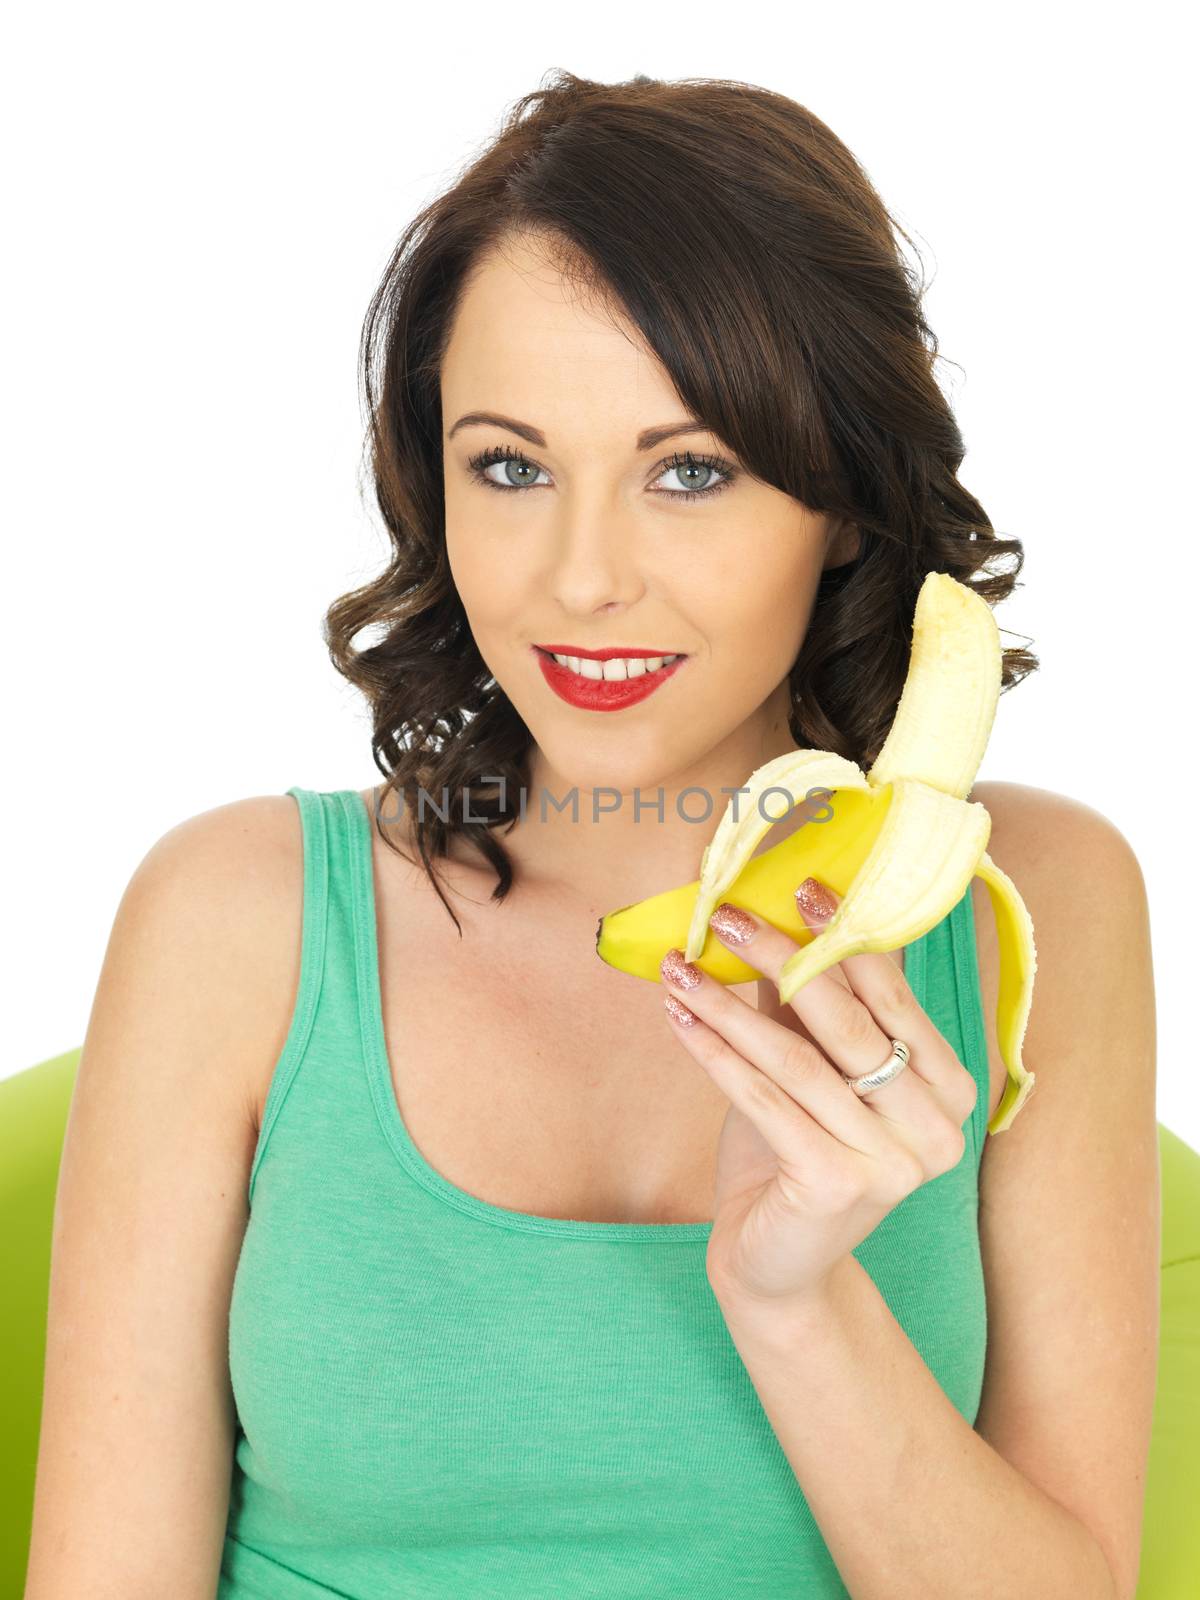 Young Woman Eating a Banana by Whiteboxmedia